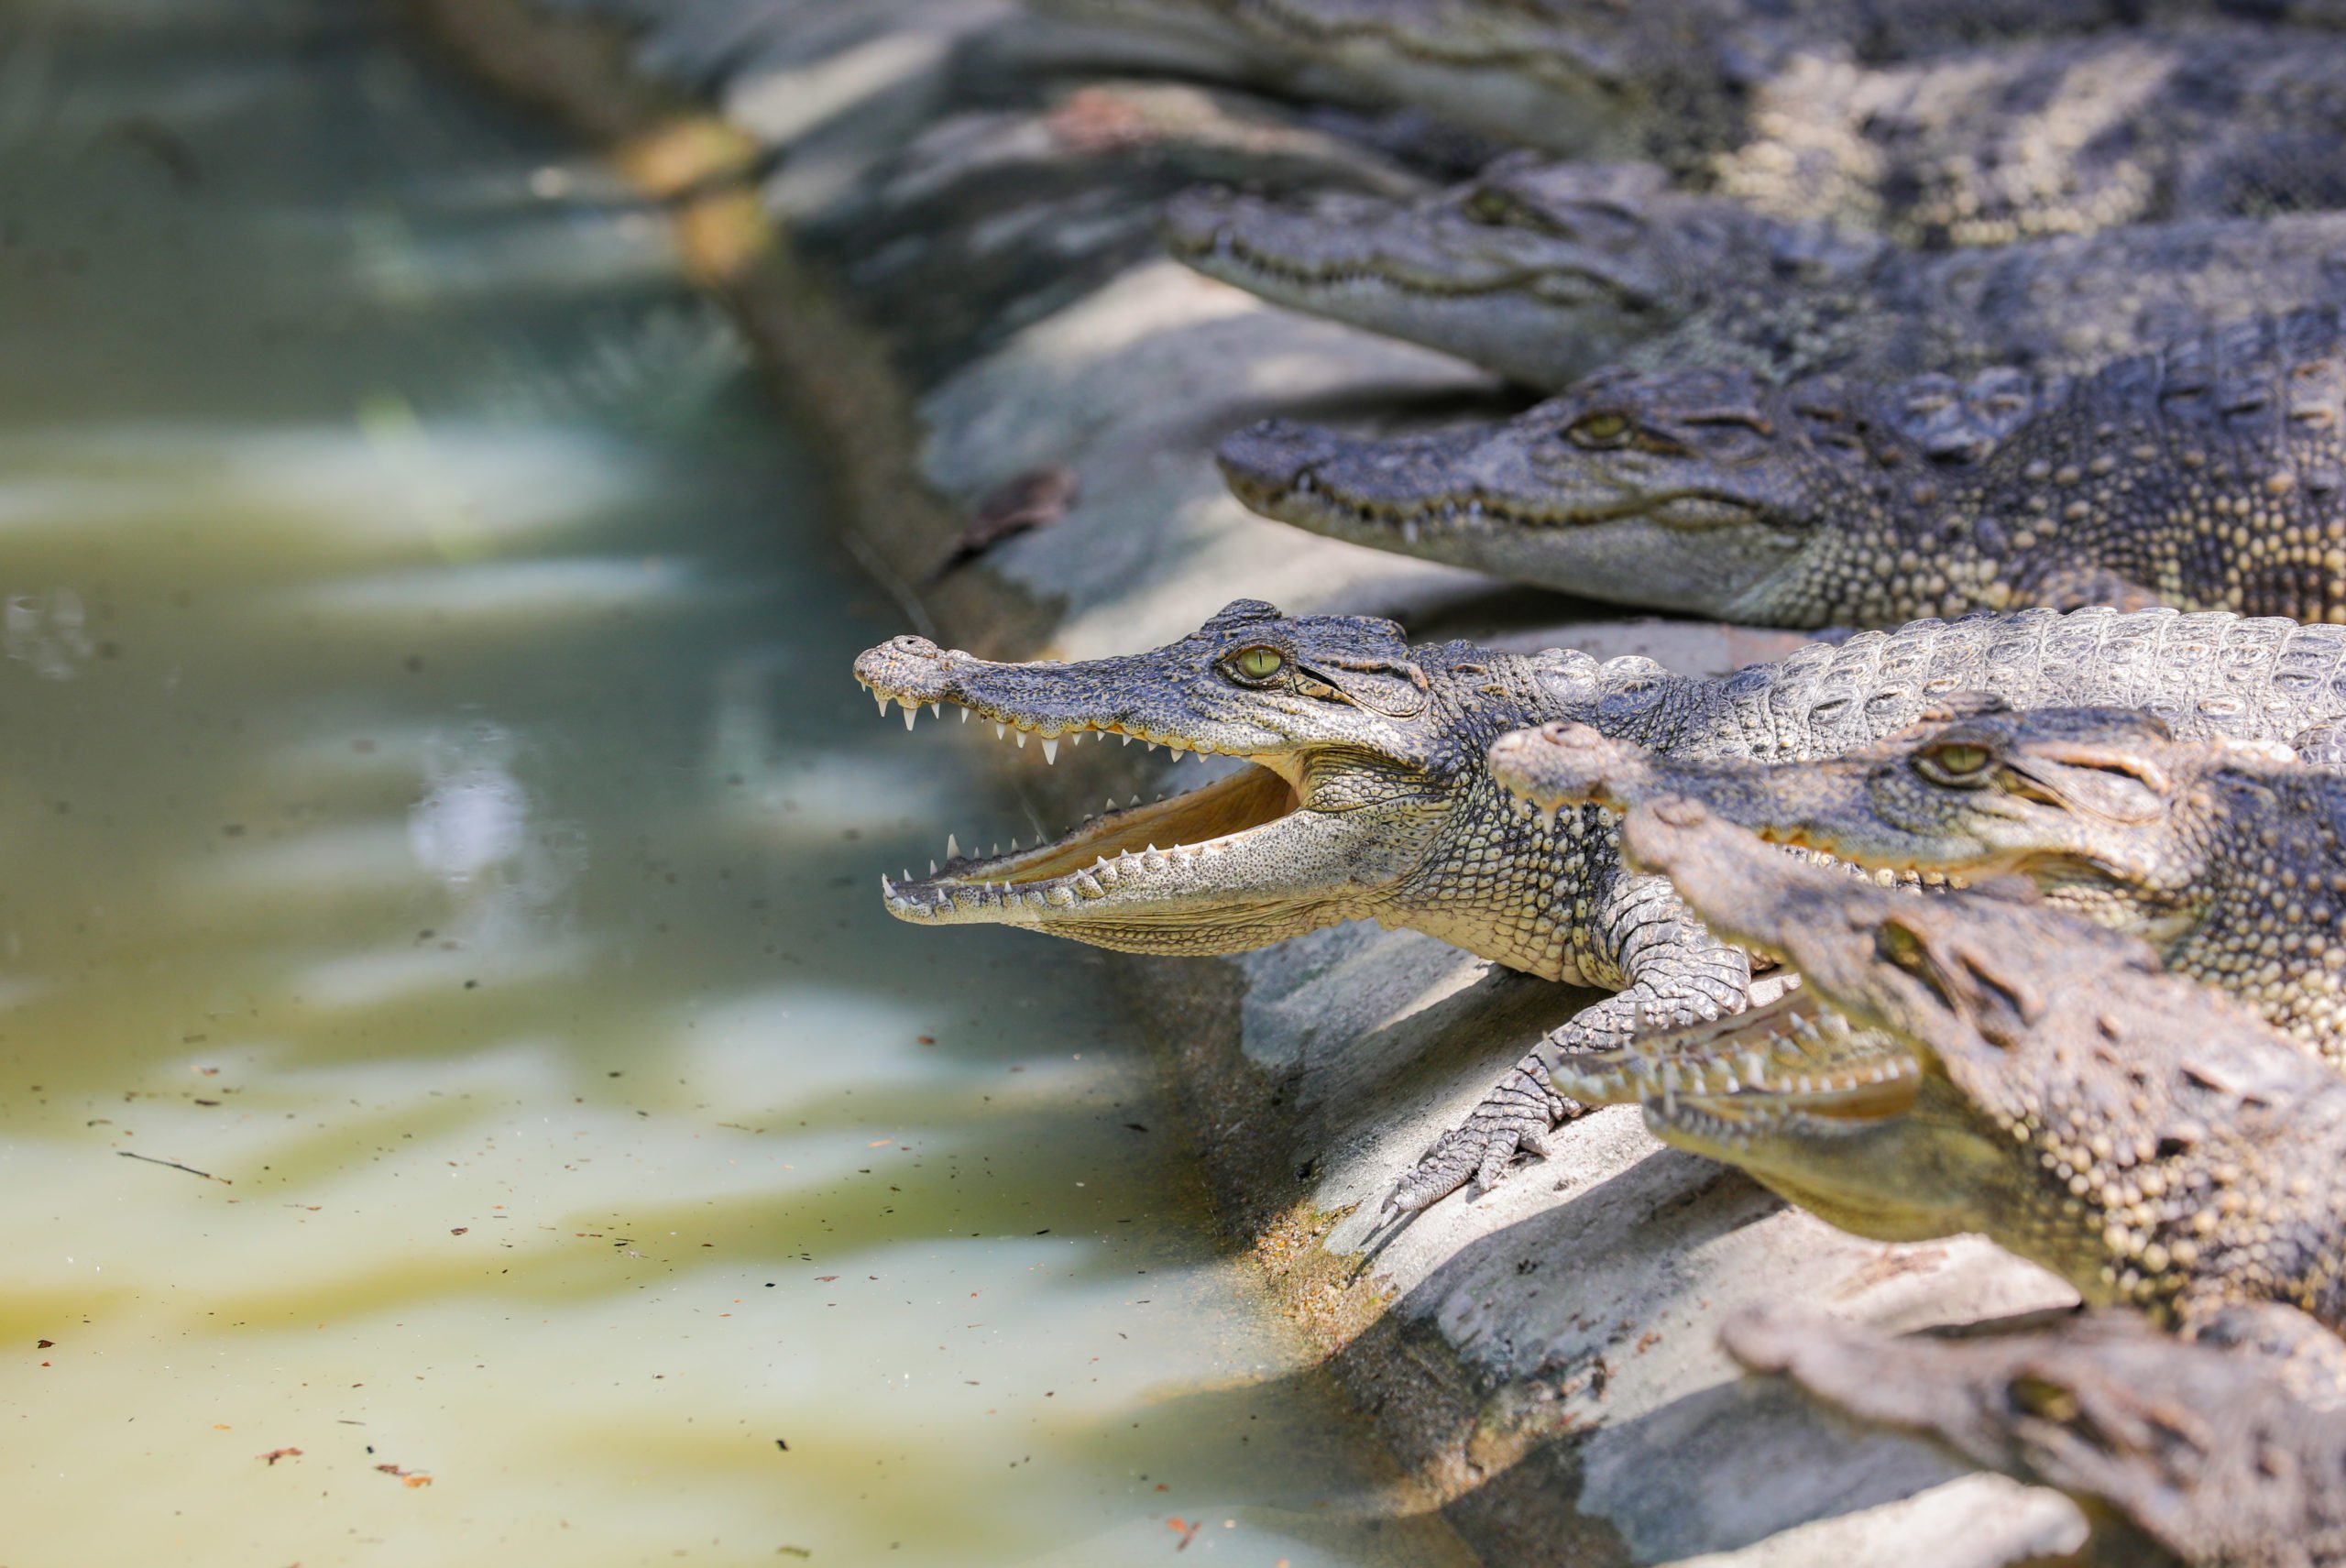 Juvenile Siamese crocodiles at Phnom Tamao Wildlife Rescue Center open their mouths to keep cool – a process similar to panting